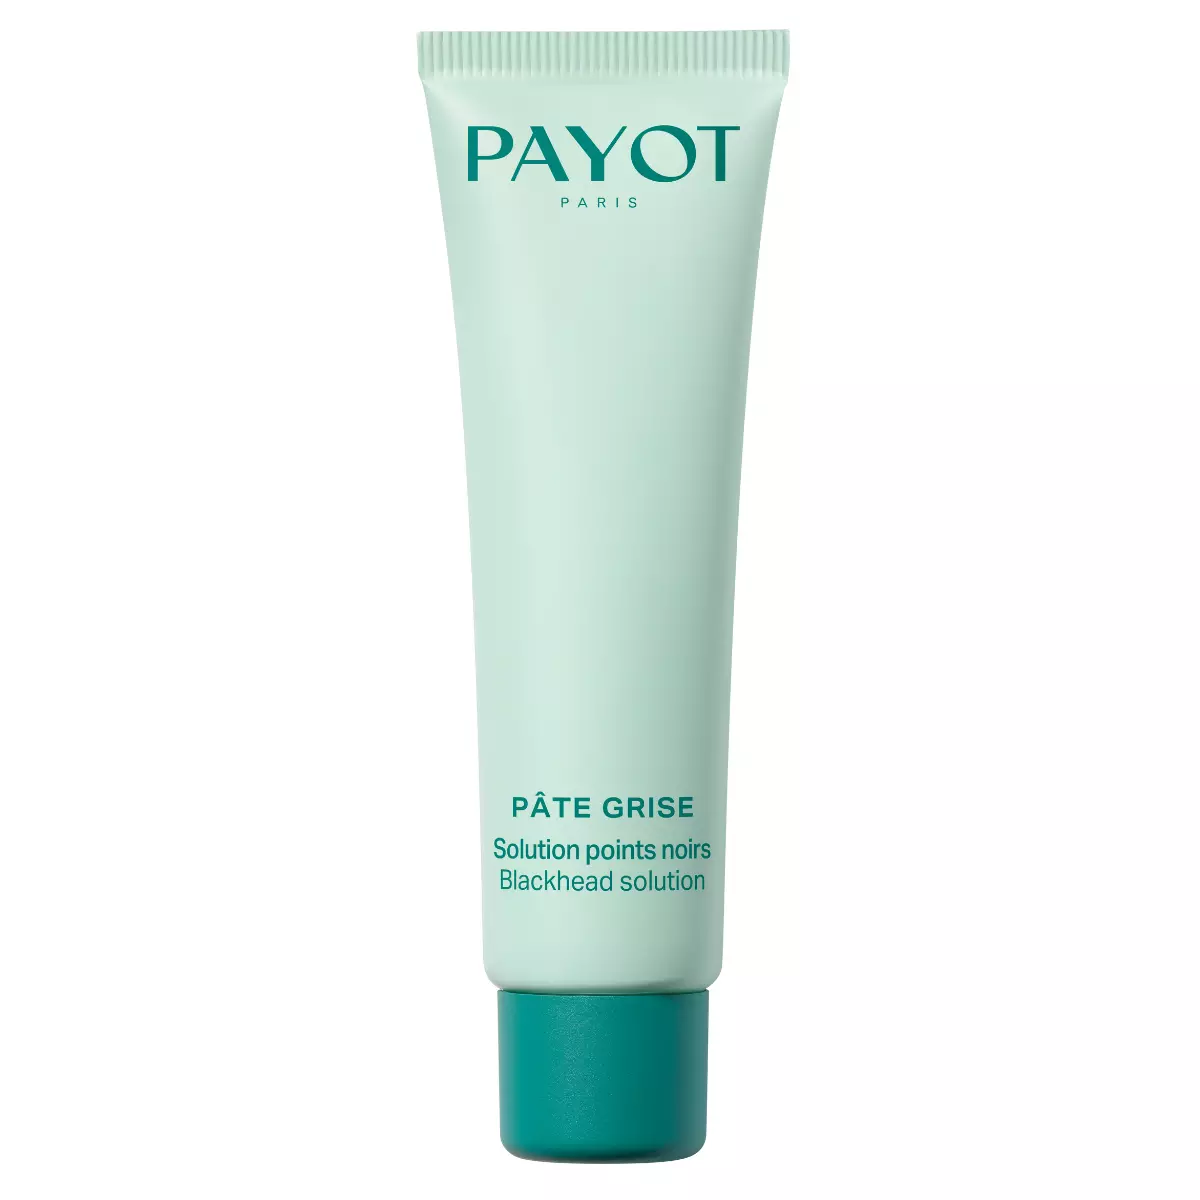 Payot Pate Grise Blackhead Solution Ml